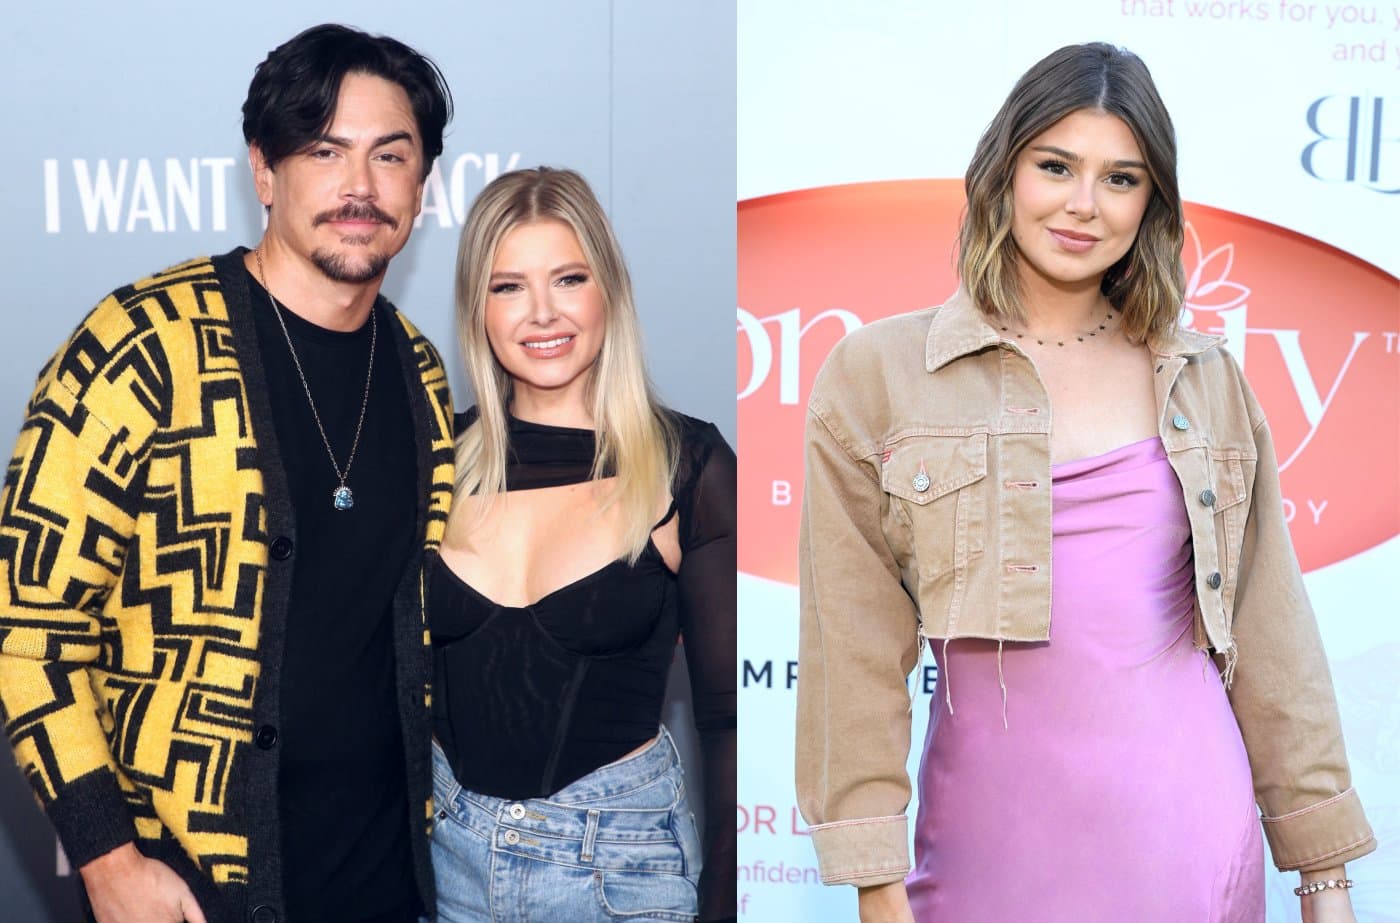 PHOTOS: Tom Sandoval Leaves Home With Suitcases Amid Raquel Affair as Kristen Explains, Plus When 'Affair' With Raquel Began and His Side of the Story